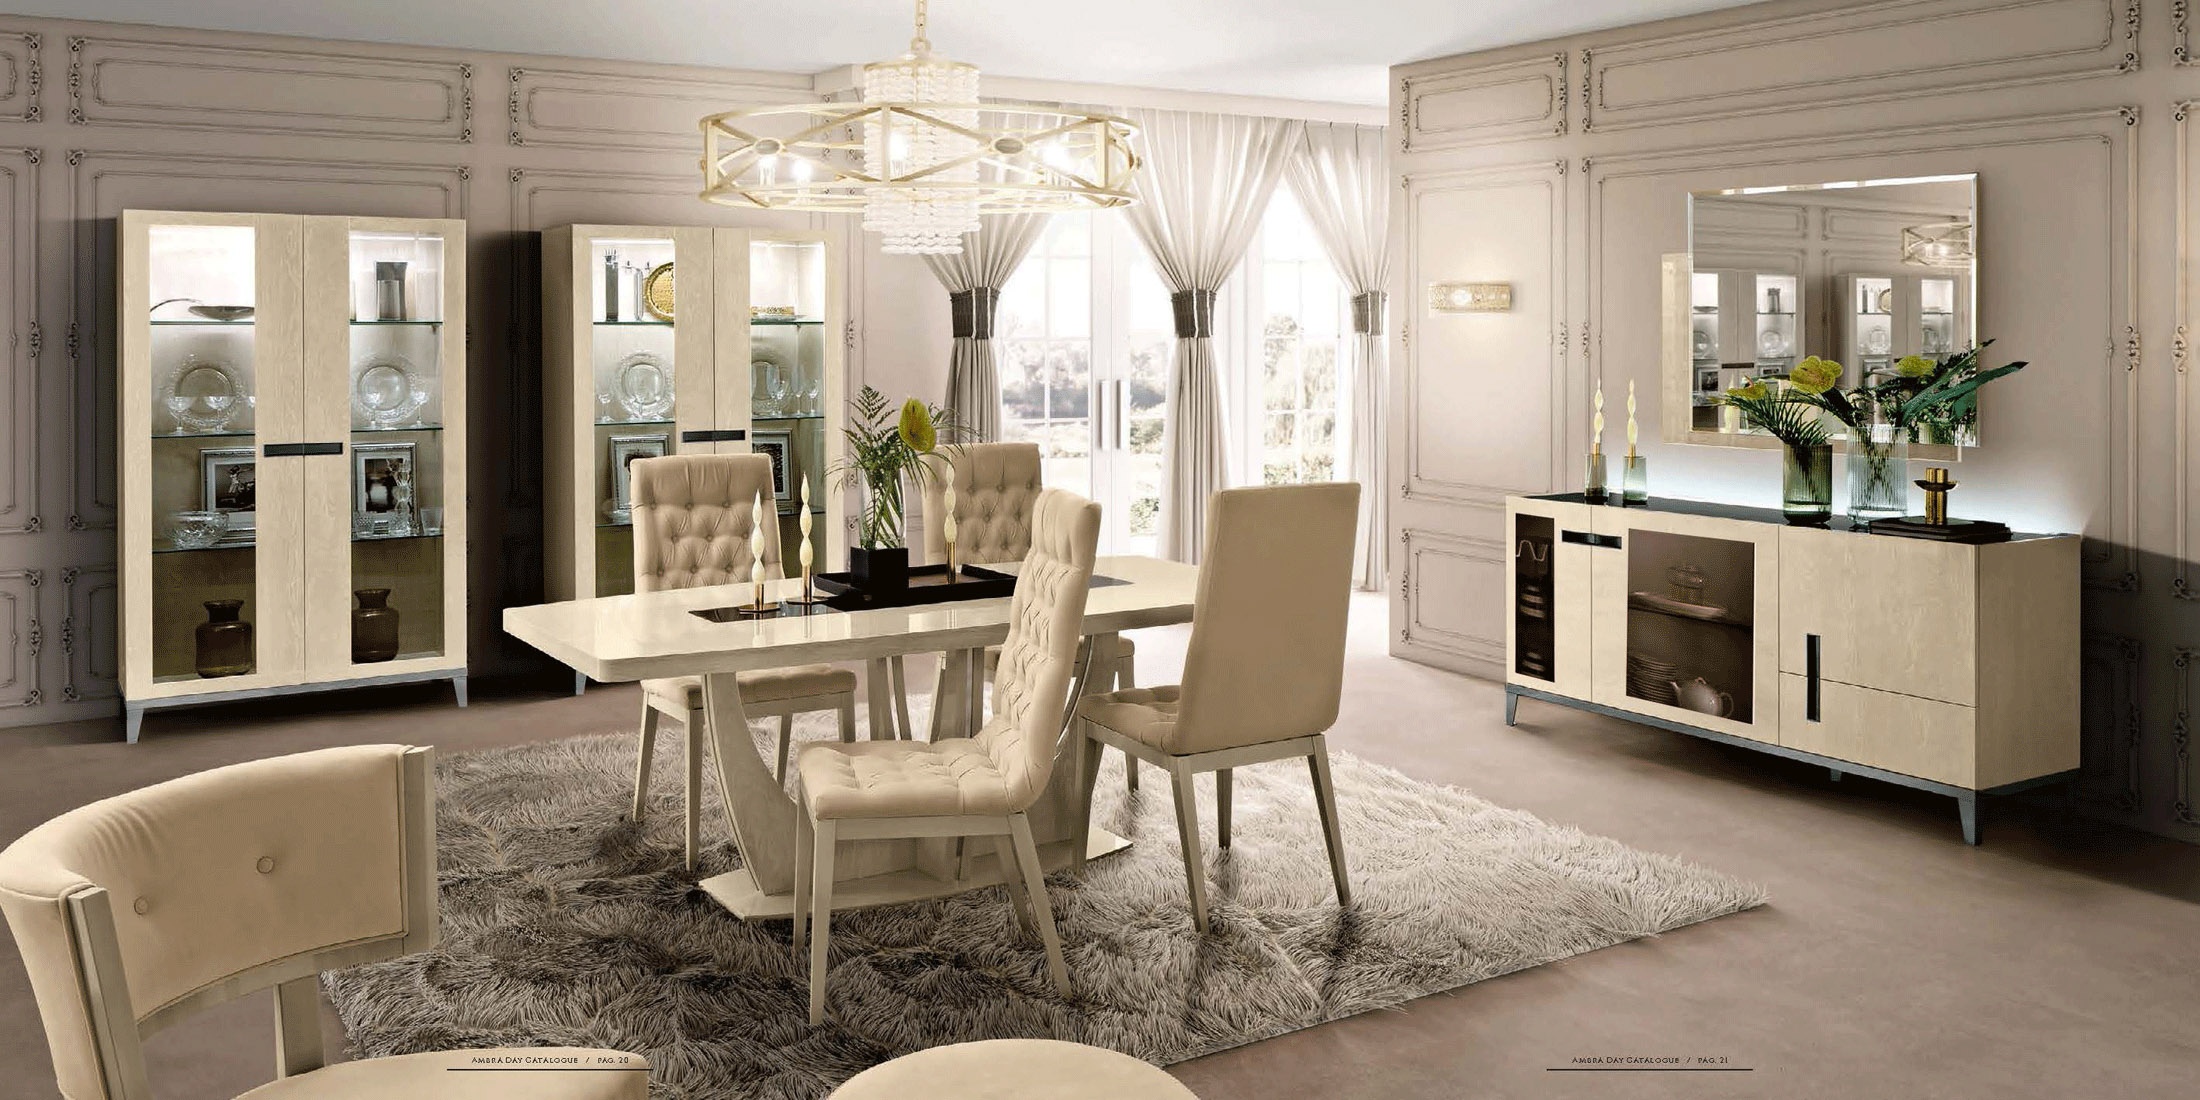 Two Door China Cabinet for Modern Homes